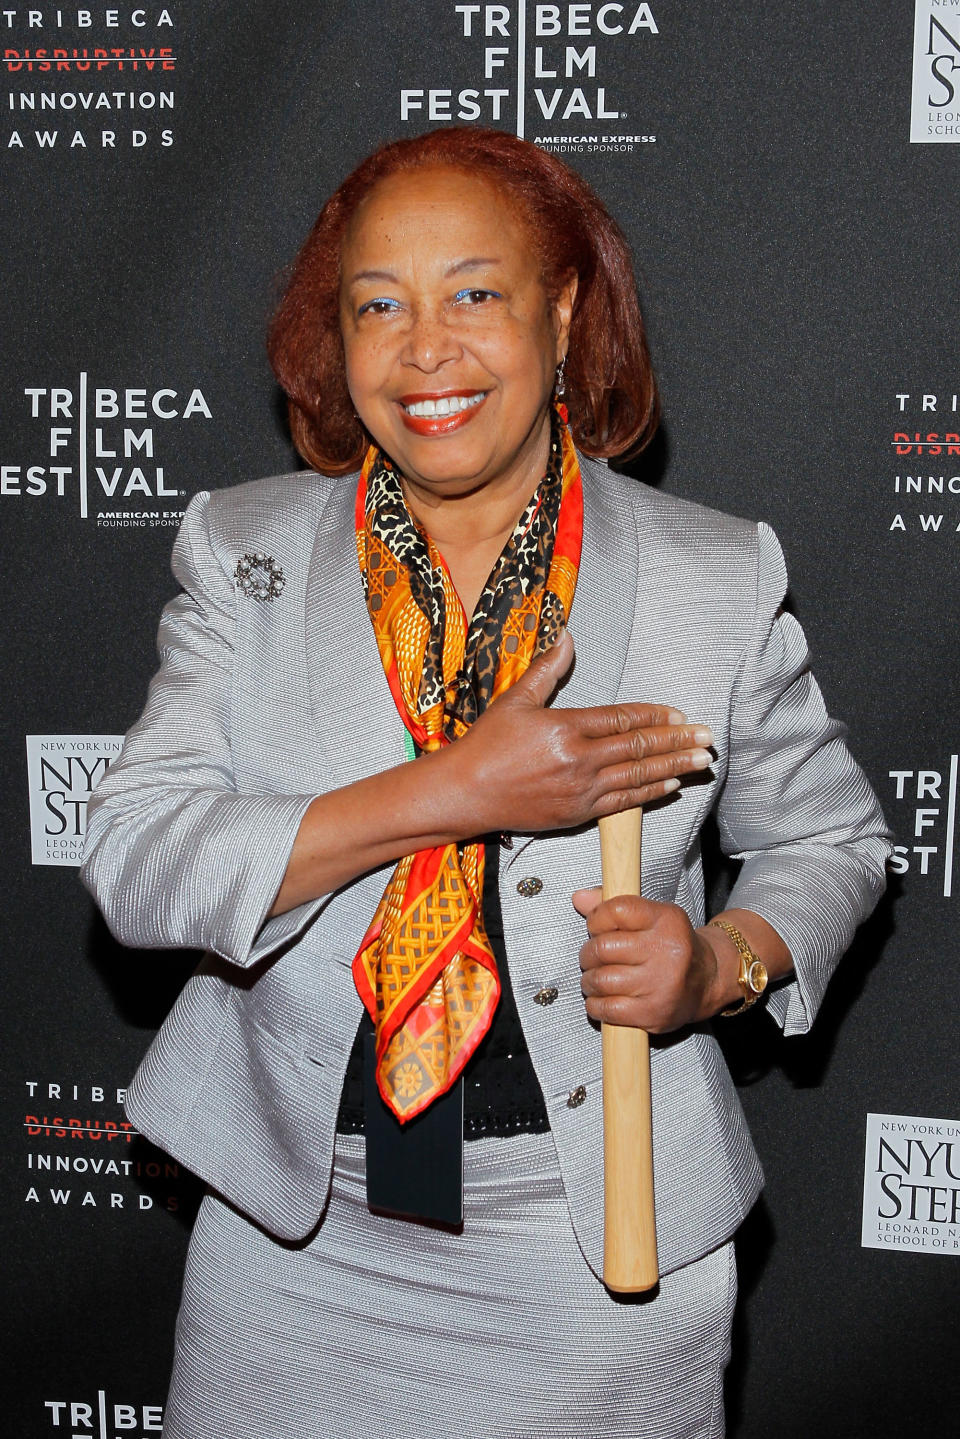 Not only was <a href="https://cfmedicine.nlm.nih.gov/physicians/biography_26.html" target="_blank">Patricia Bath</a> the first black woman surgeon at the UCLA Medical Center, she is also a prolific inventor in the world of optometry. In 1981, Patricia Bath developed the&nbsp;Laserphaco Probe, a medical tool for cataract removal. The invention made her the first African American woman doctor to receive a patent for a medical invention.